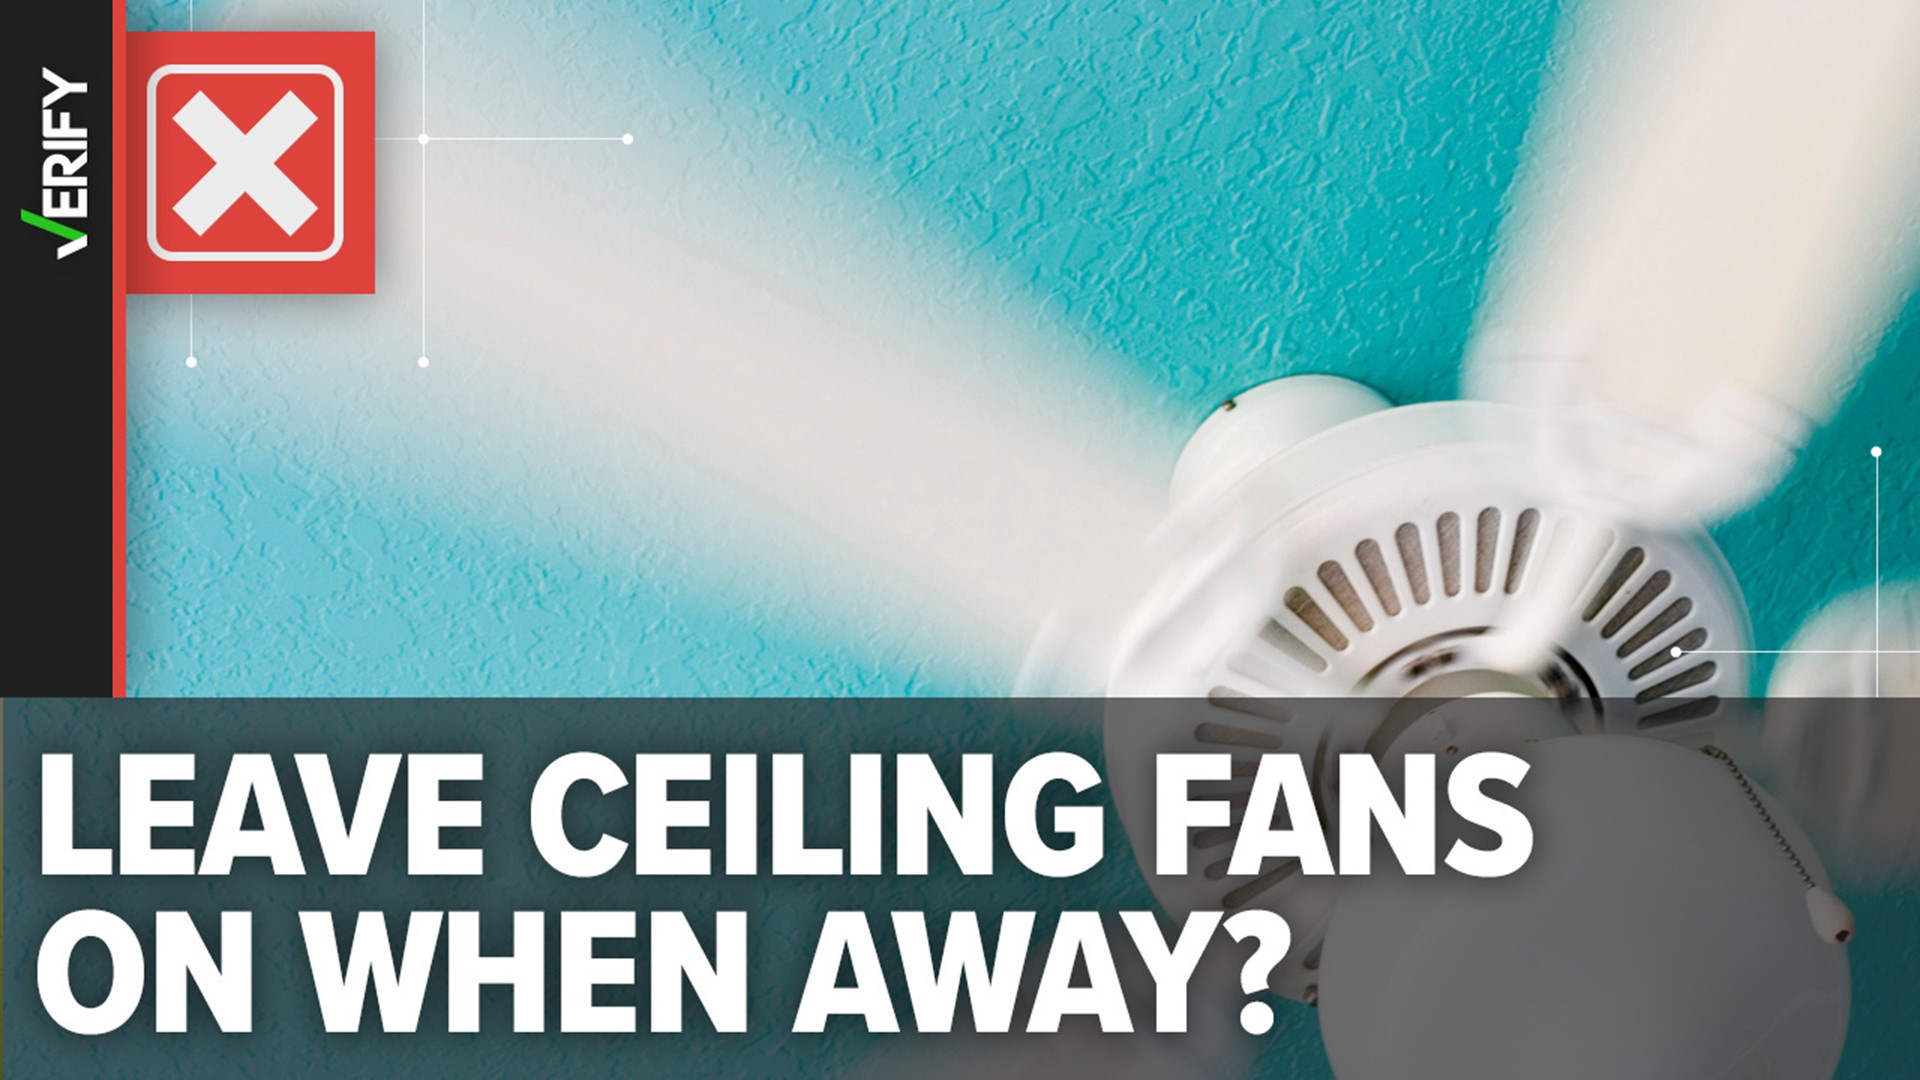 Does leaving the fan on make it cooler?